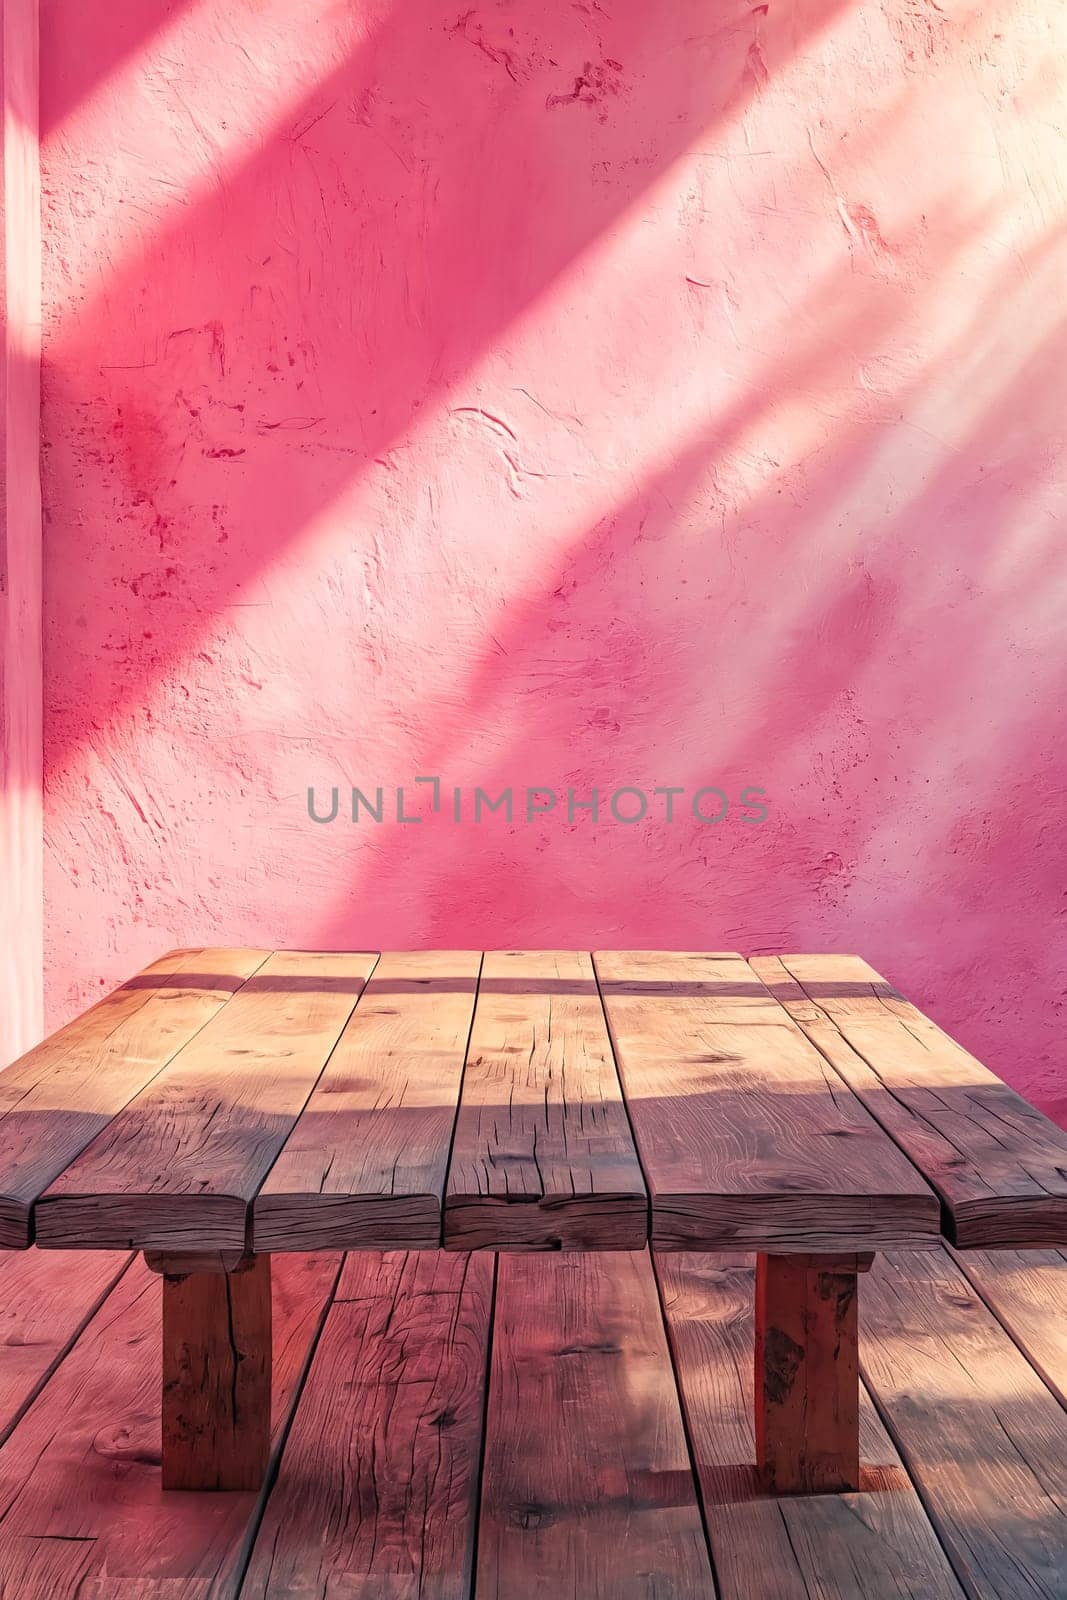 A wooden table is sitting in front of a pink wall. The table is empty and the wall is painted in a bright pink color. The sunlight is shining on the table, creating a warm and inviting atmosphere. Generative AI